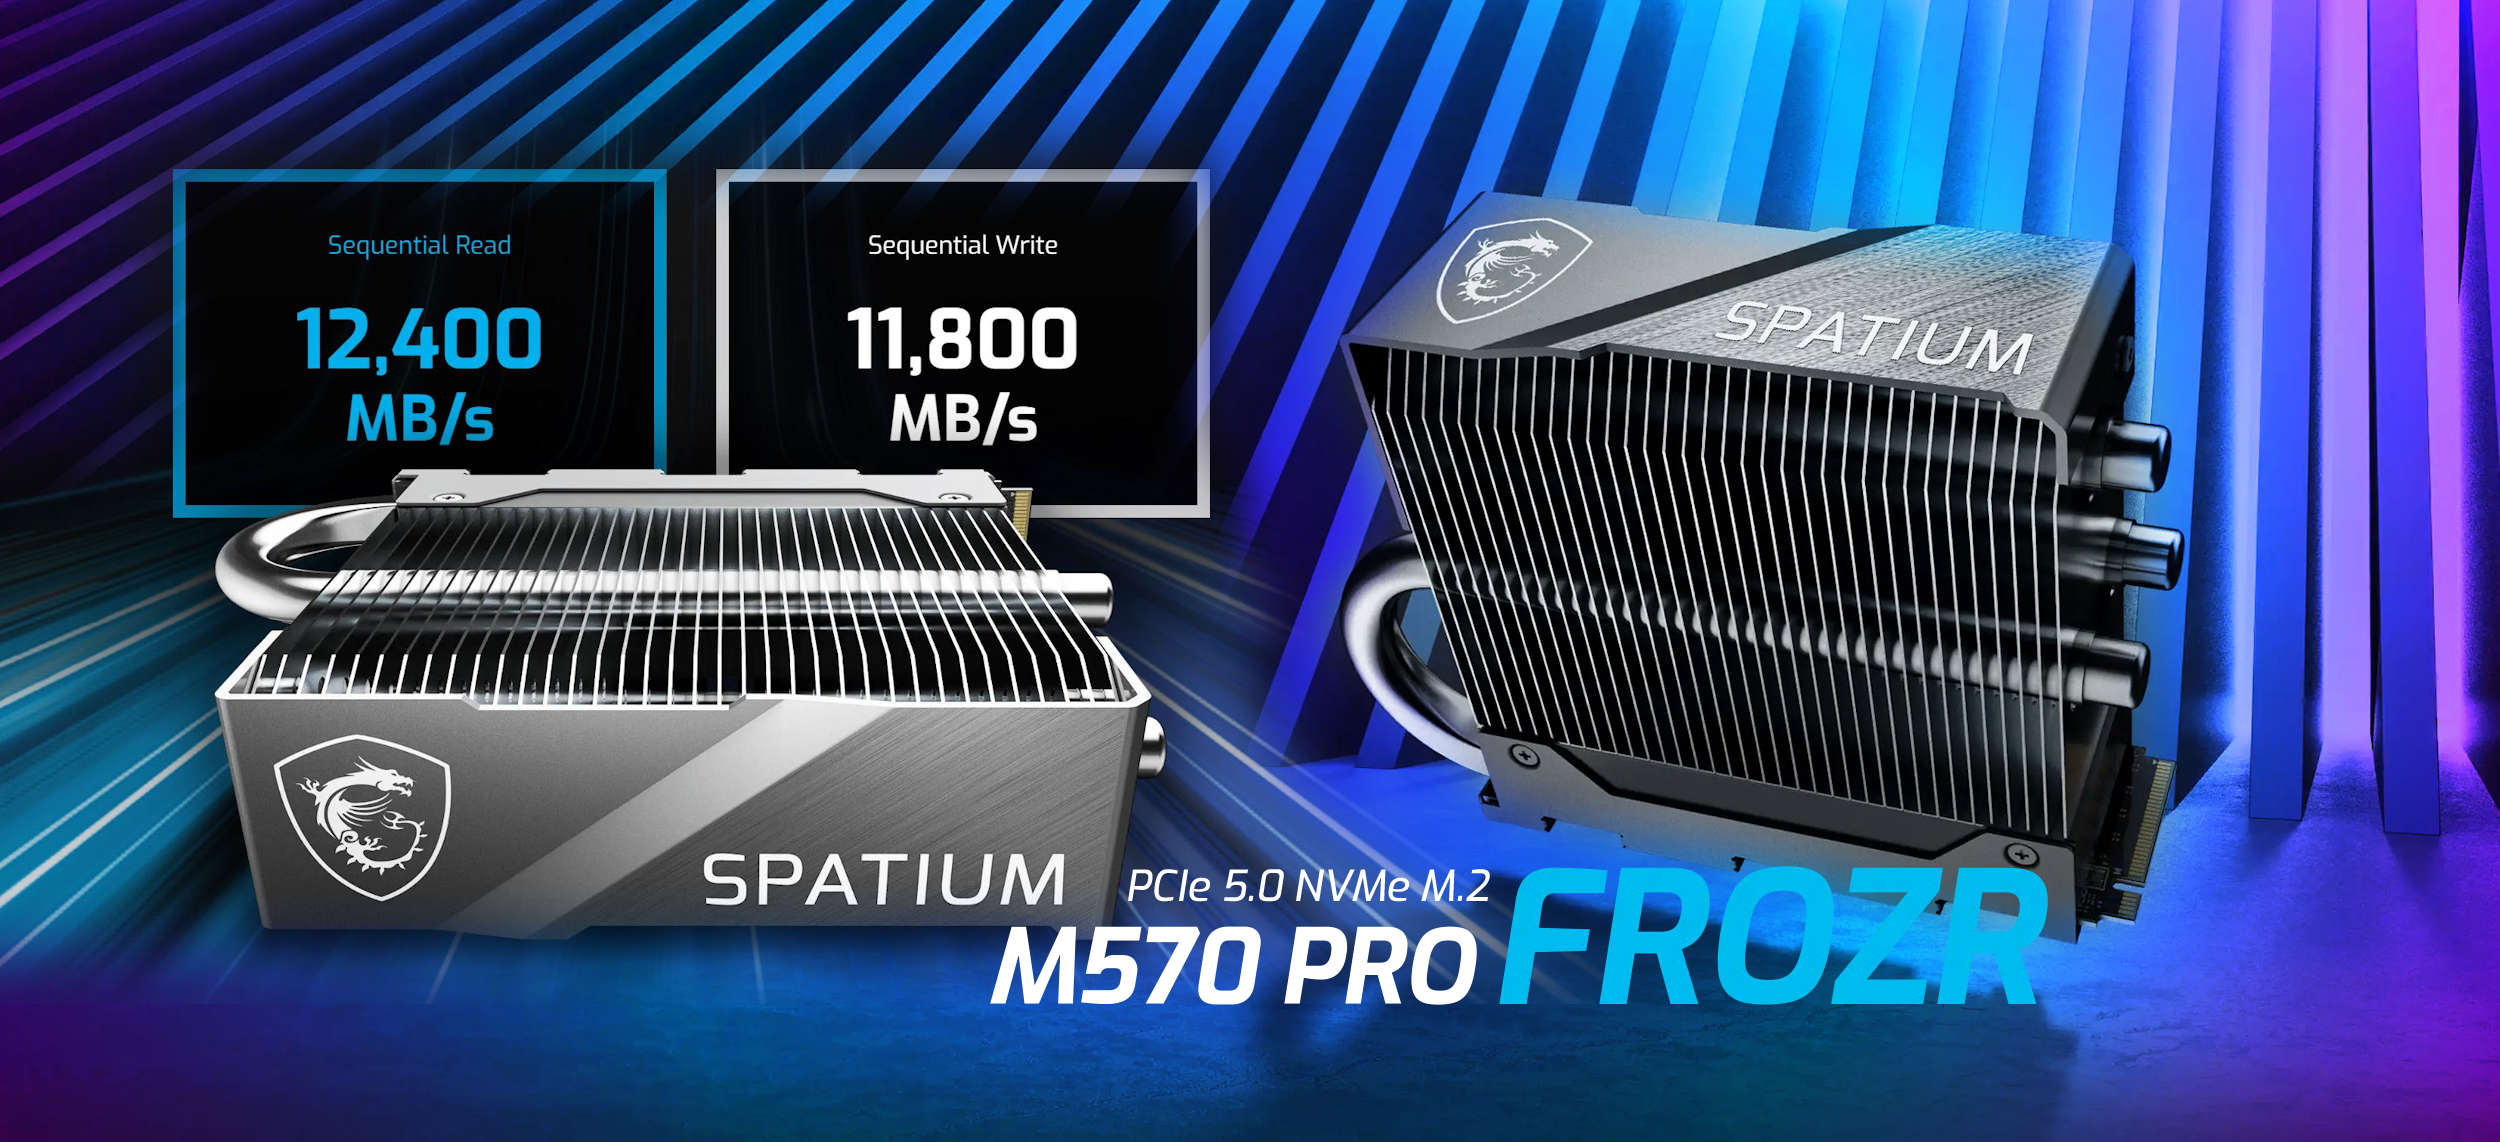 MSI SPATIUM M570 PRO FROZR 2 TB PCIe 5.0 NVMe SSD Review – Massive &  Passive Frozr Cooling